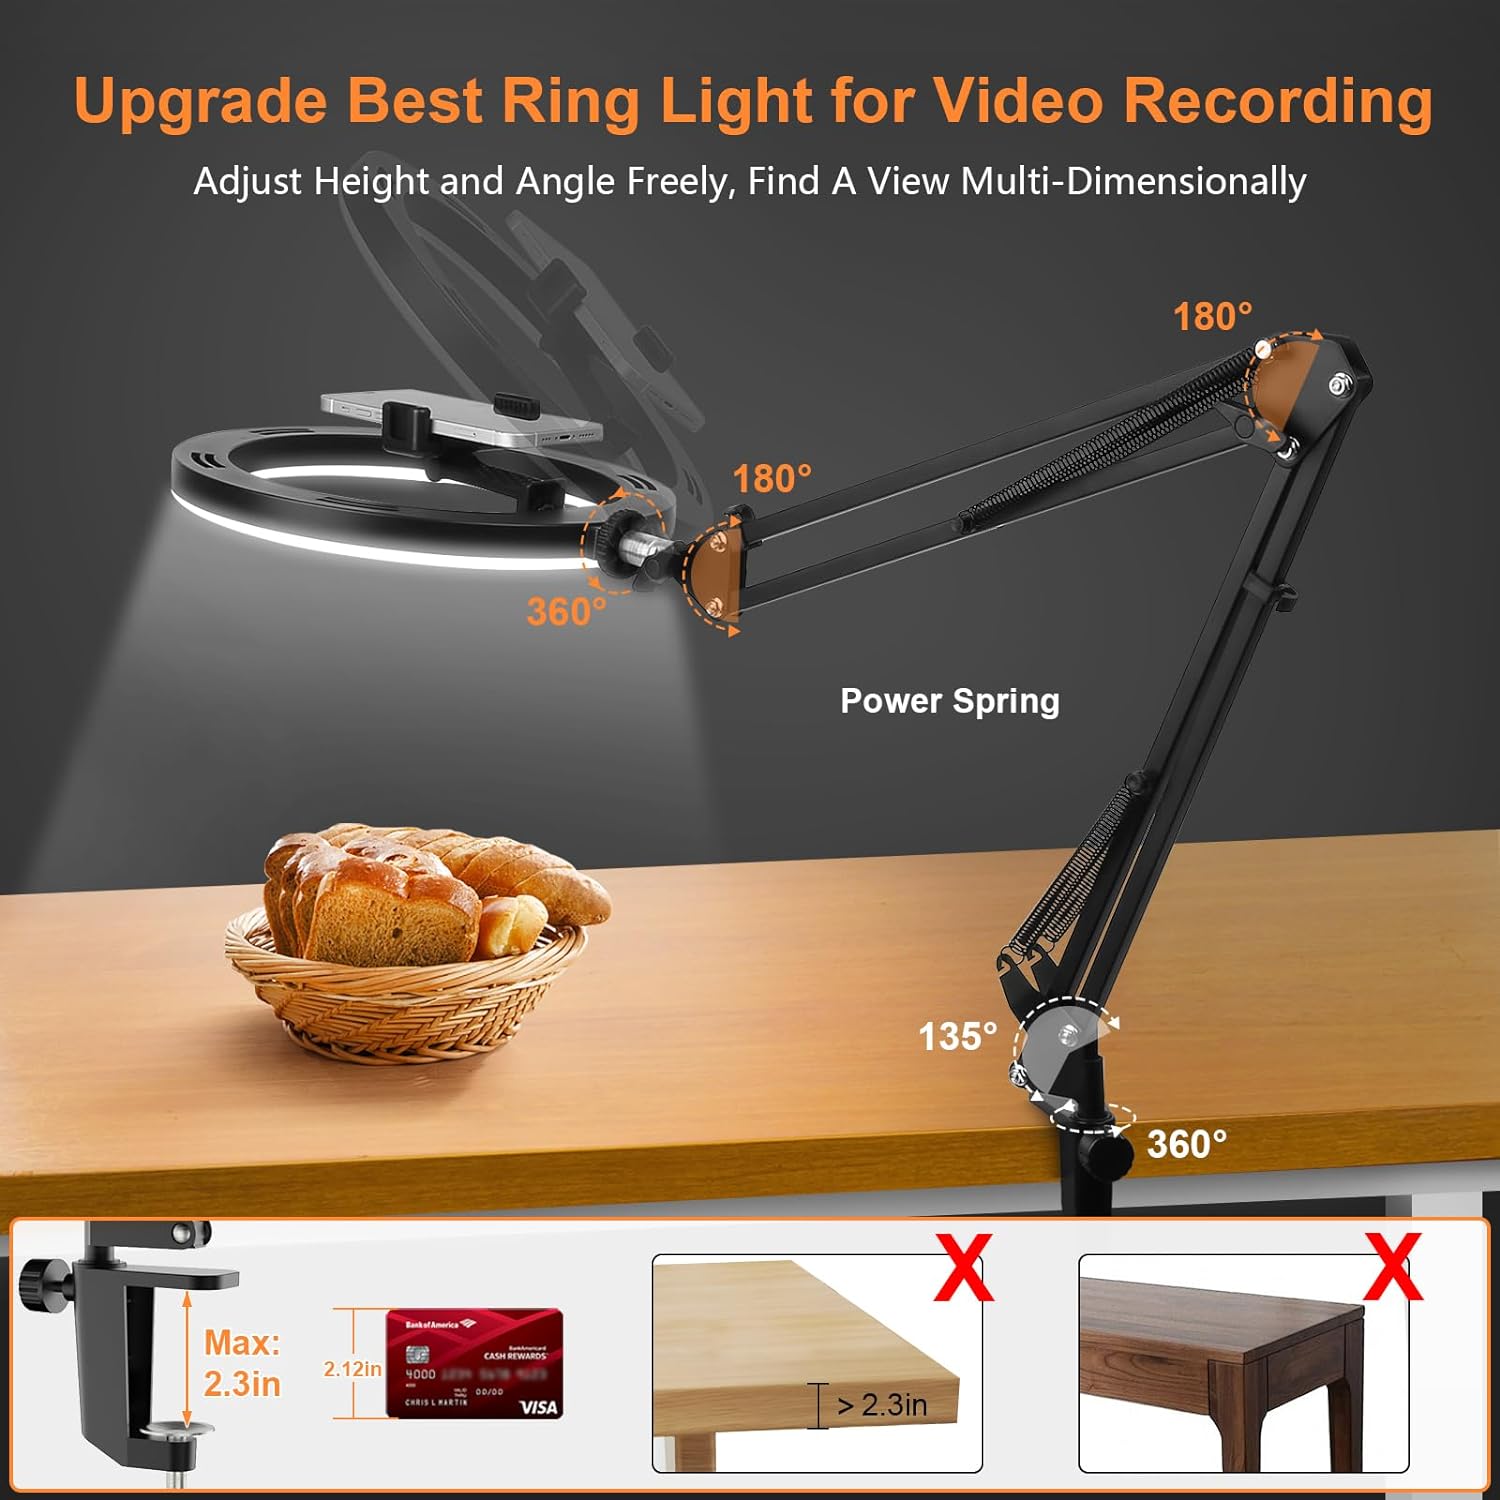 Upgrade Ring Light Overhead,Evershop Selfie Ring Light with Stand and Phone Holder,10”Circle LED Portable Ring Light with Remote Control for Video Recording,Zoom Meeting,Live Streaming Tiktok,YouTube